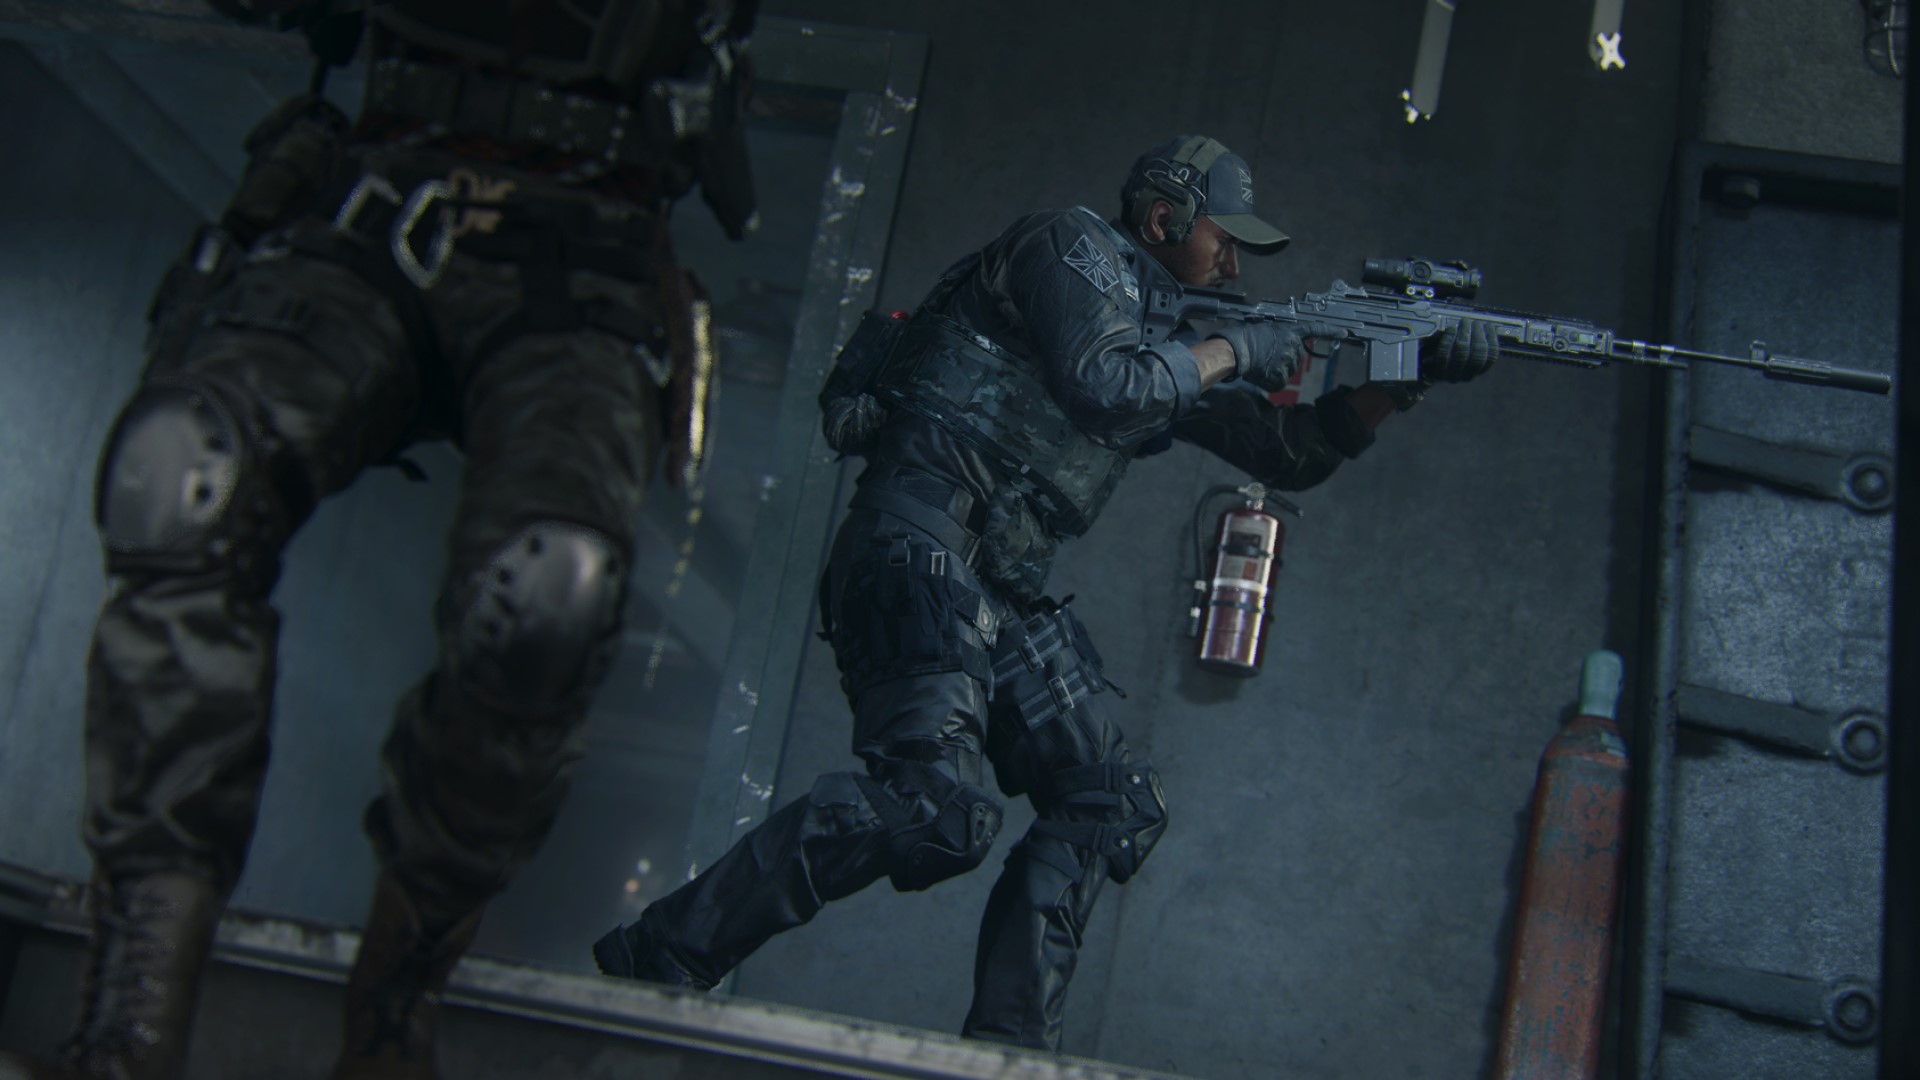 Call of Duty Warzone DMZ’s new Building 21 has been locked down